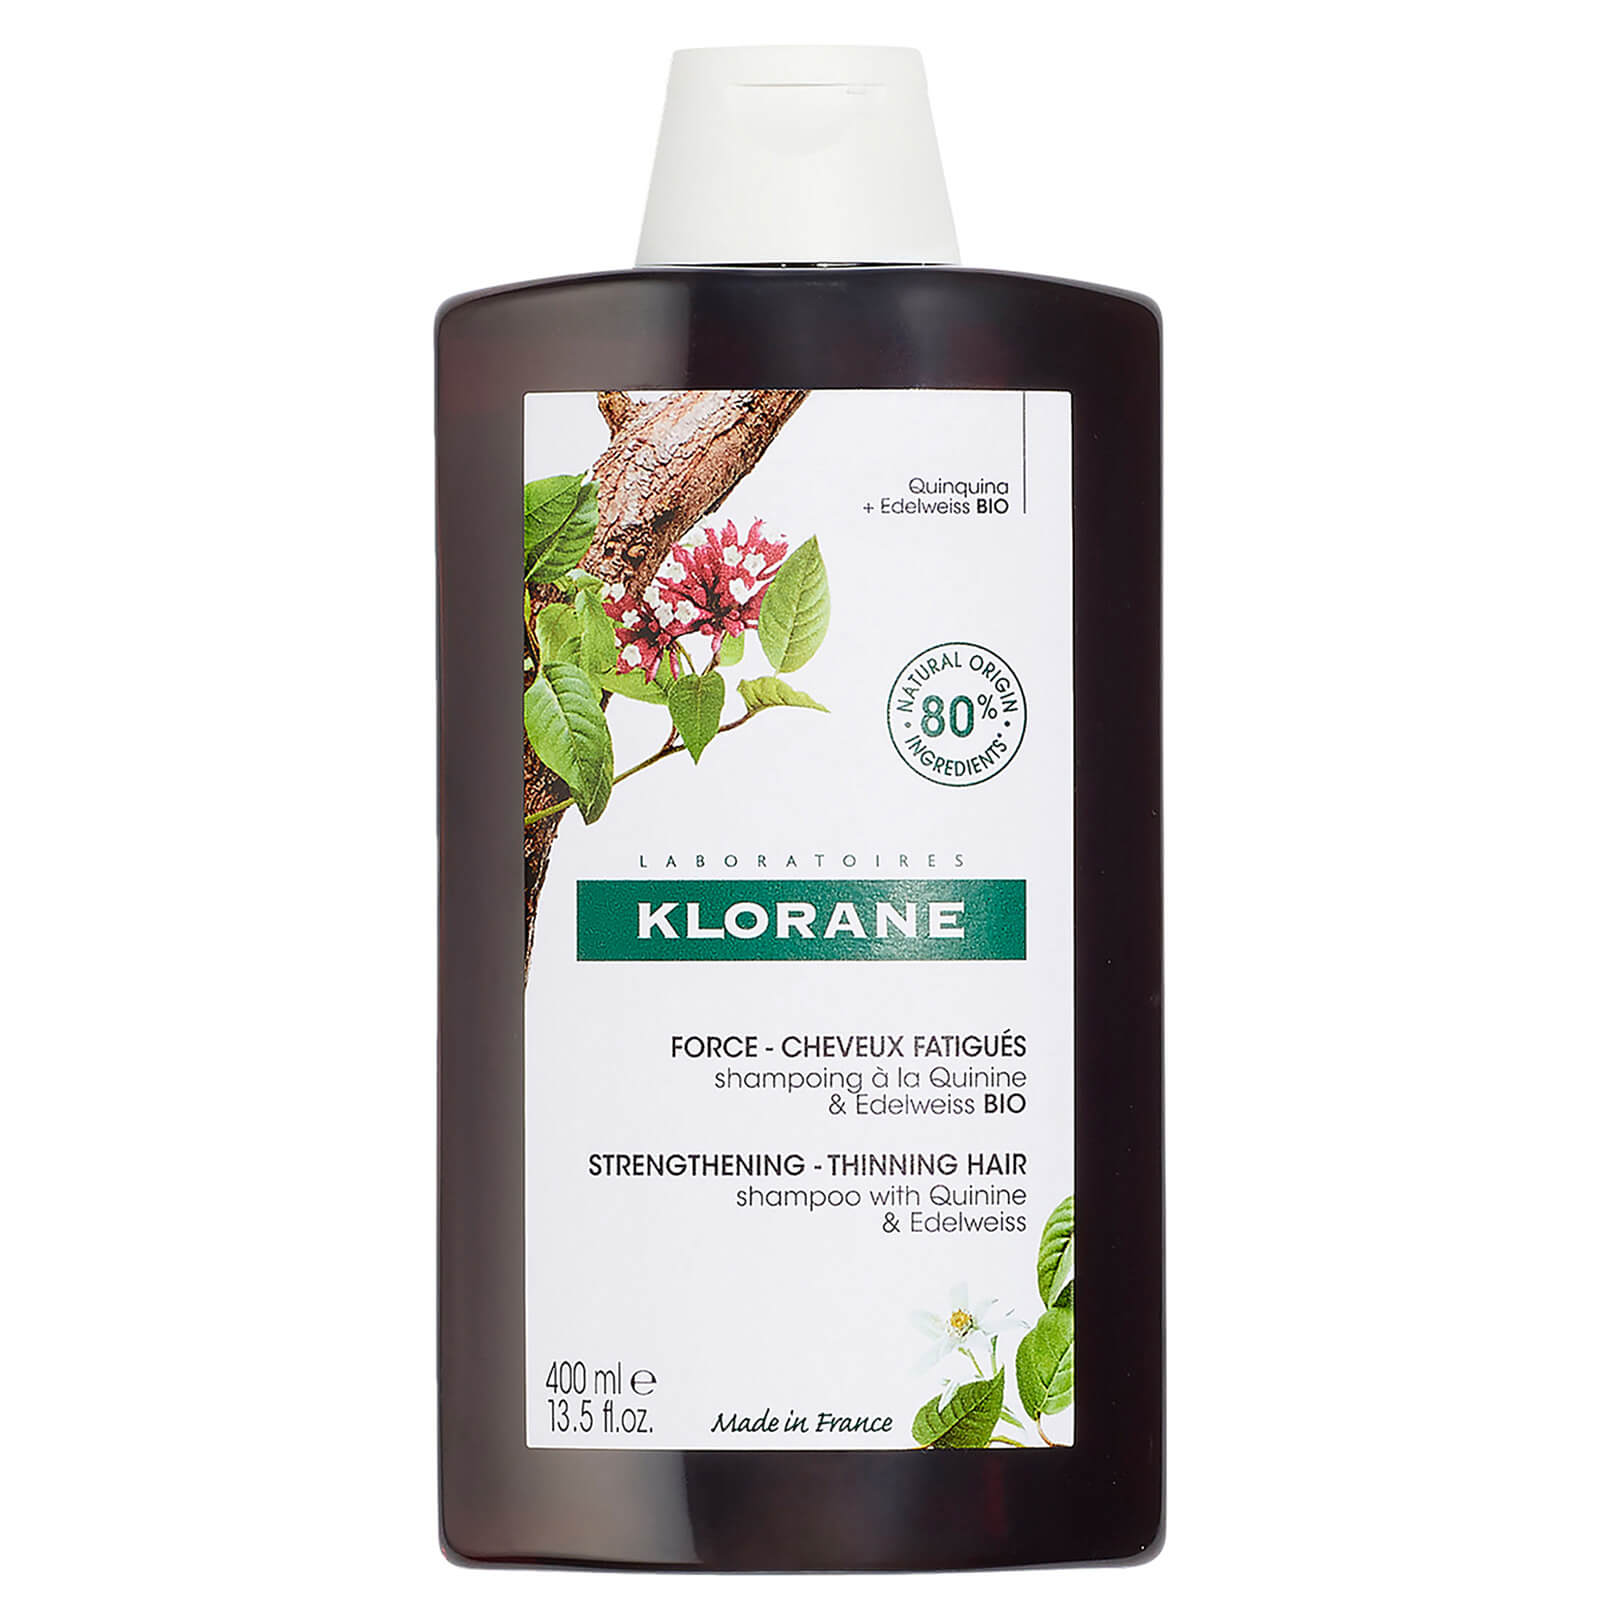 KLORANE Strengthening Shampoo with Quinine and Organic Edelweiss for Thinning Hair 400ml lookfantastic.com imagine